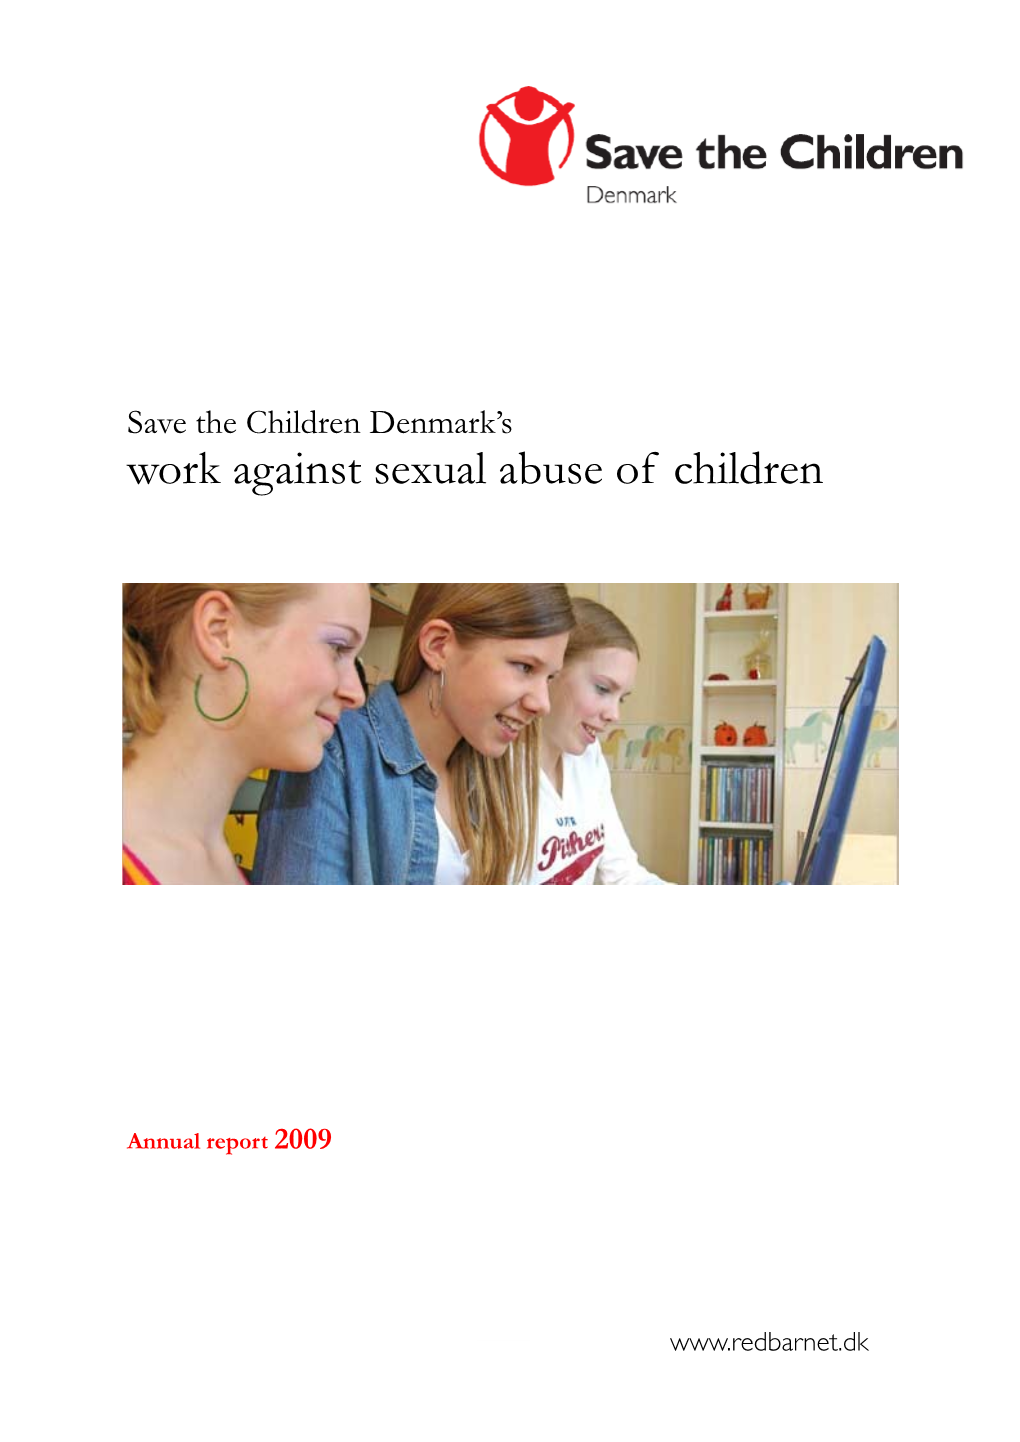 Work Against Sexual Abuse of Children